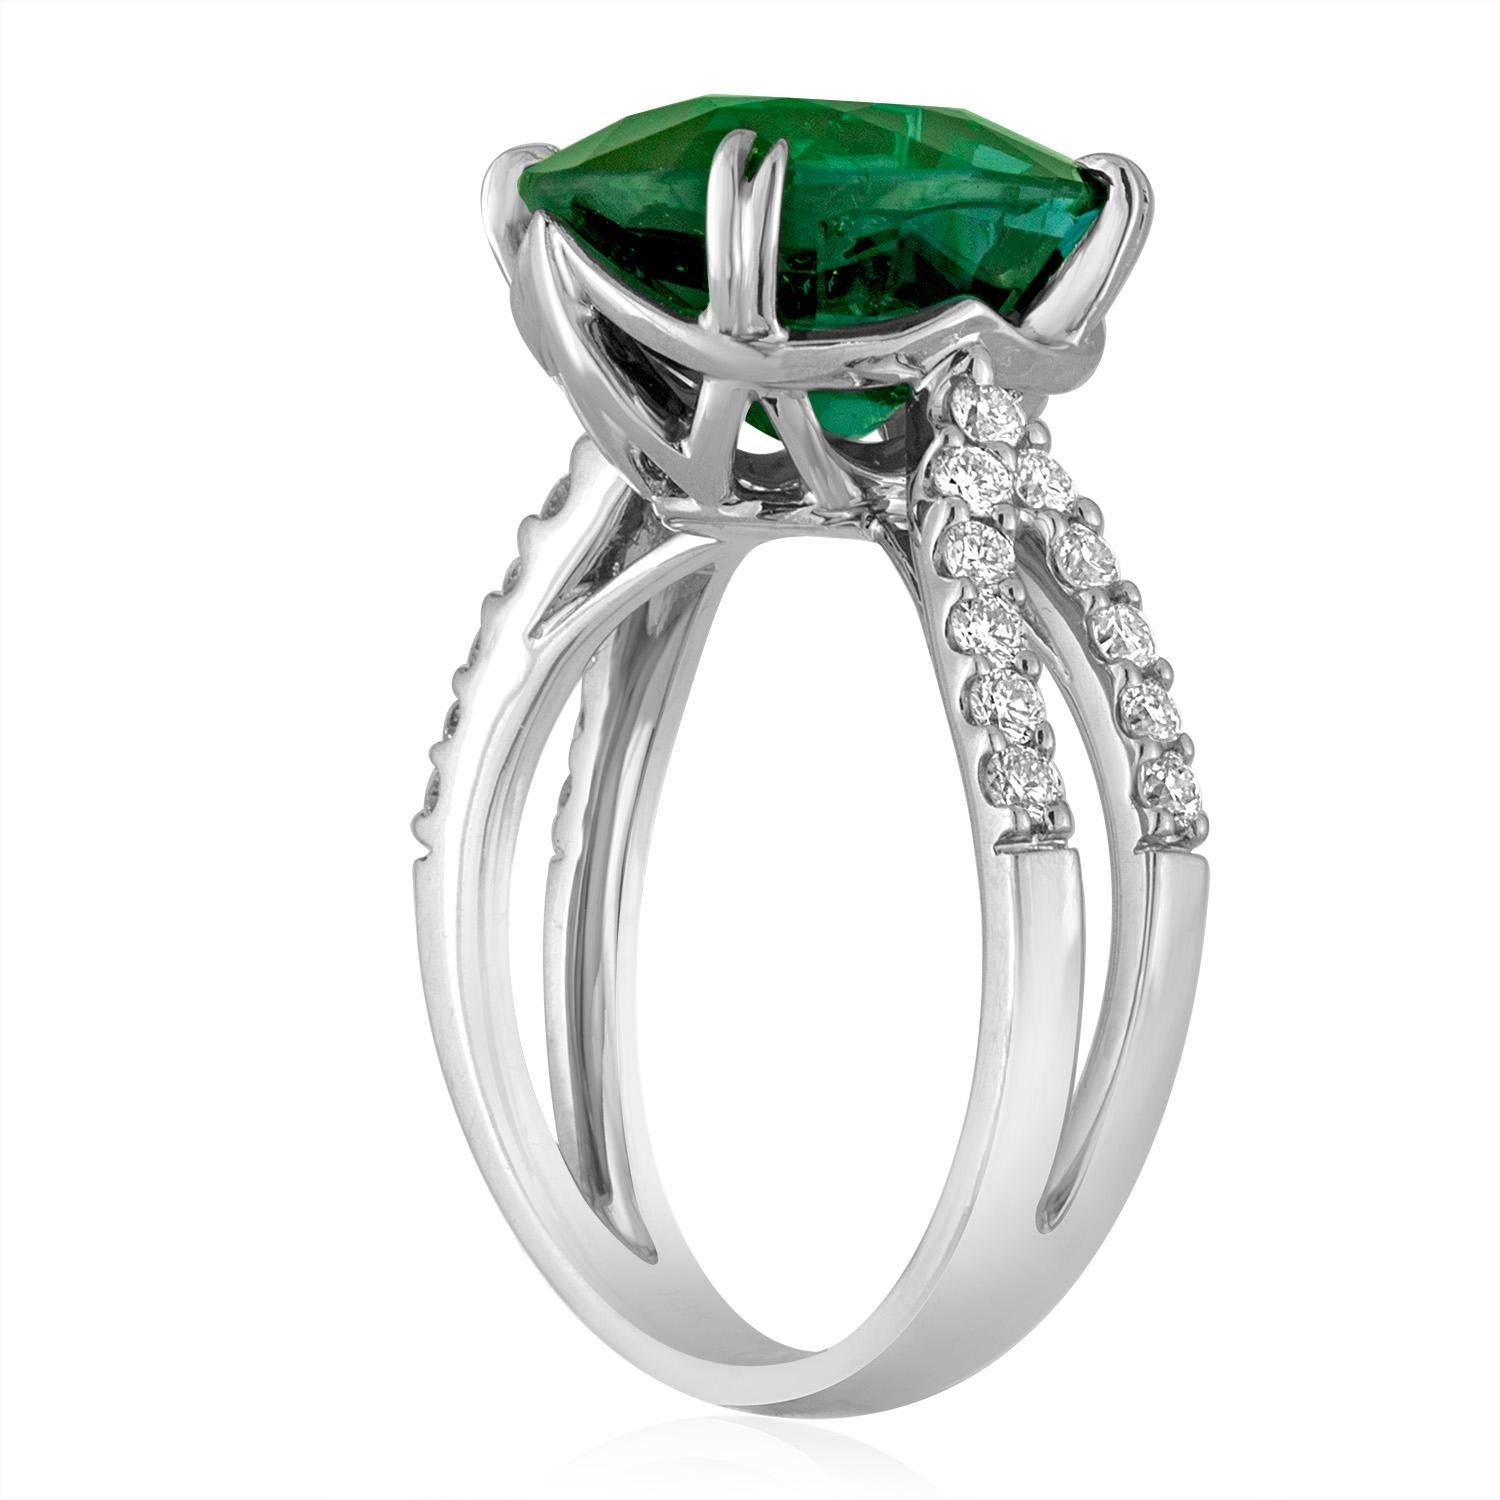 One-Of-A-Kind Tourmaline Ring
The ring is 18K White Gold
The ring has 0.45 Carats in Diamonds F VS/SI.
The center stone is an oval Greenish Blue Tourmaline.
The tourmaline is 5.97 Carats Certified by LAPIS.
The ring is a size 6.5, sizable.
The ring